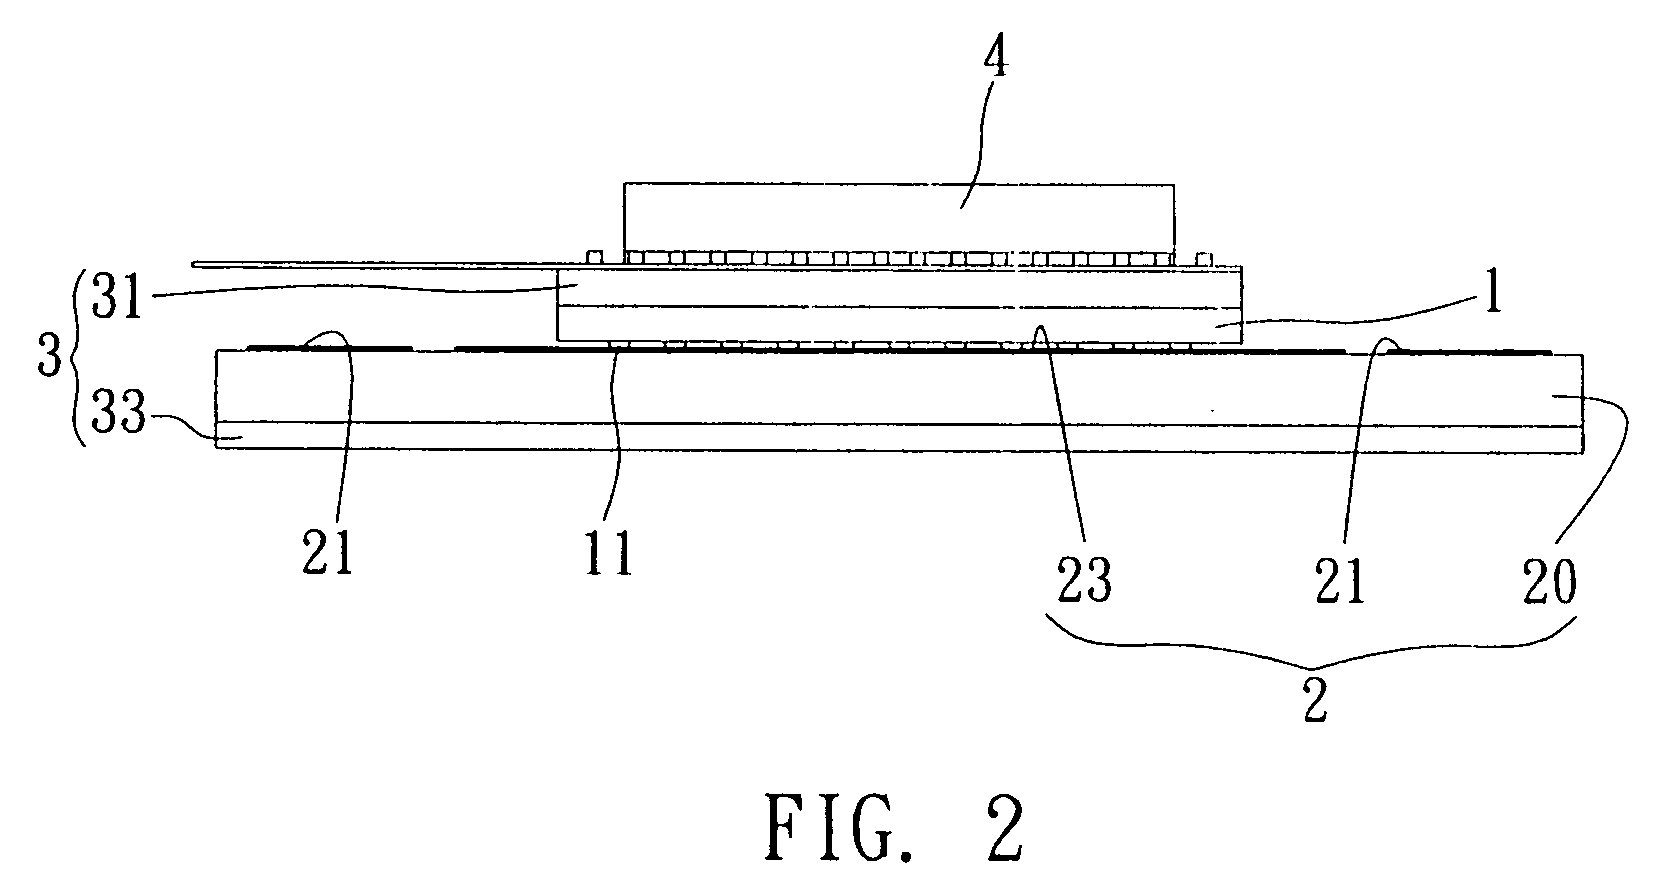 Image stabilization driving device